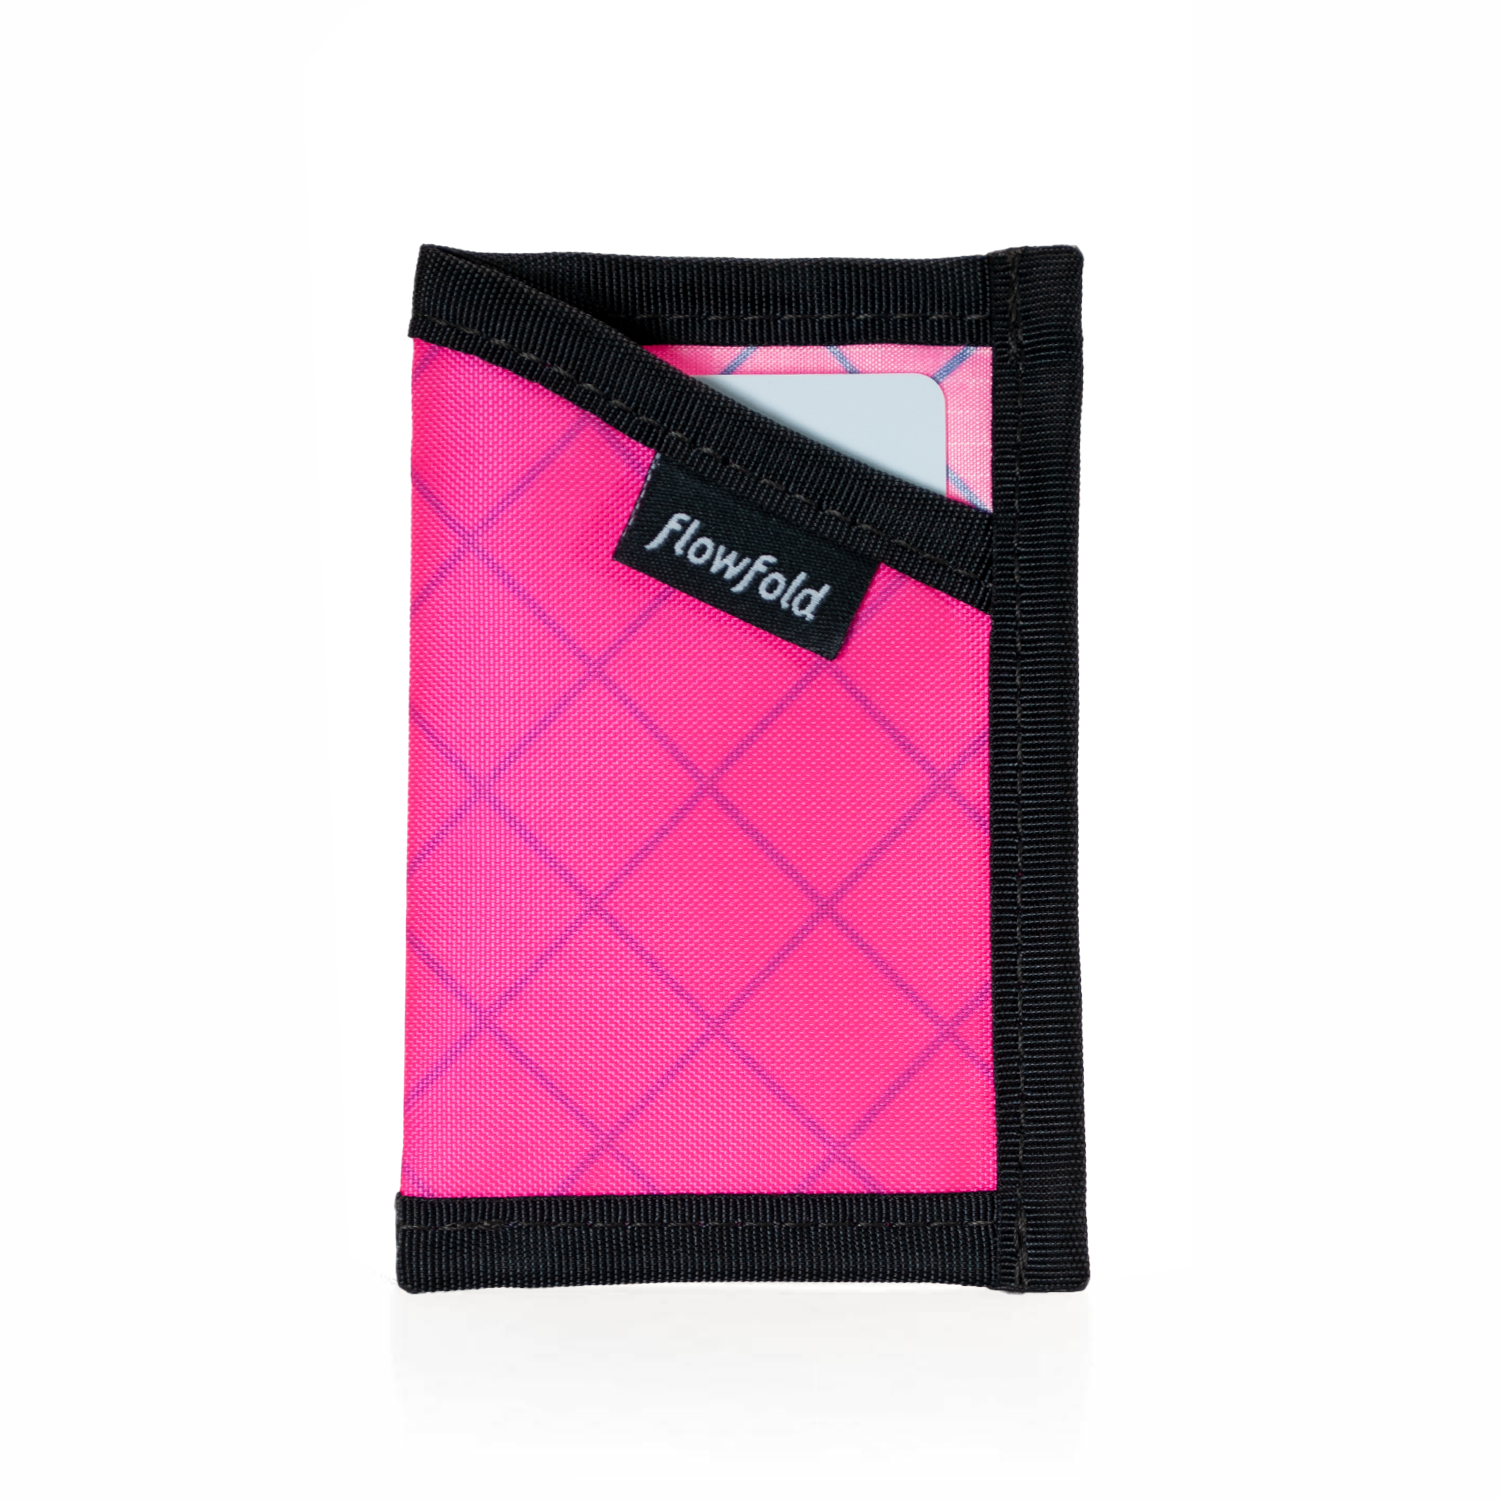 Flowfold Minimalist Card Holder Wallet Recycled Wallet of 100% Recycled Polyester EcoPak Hot Pink